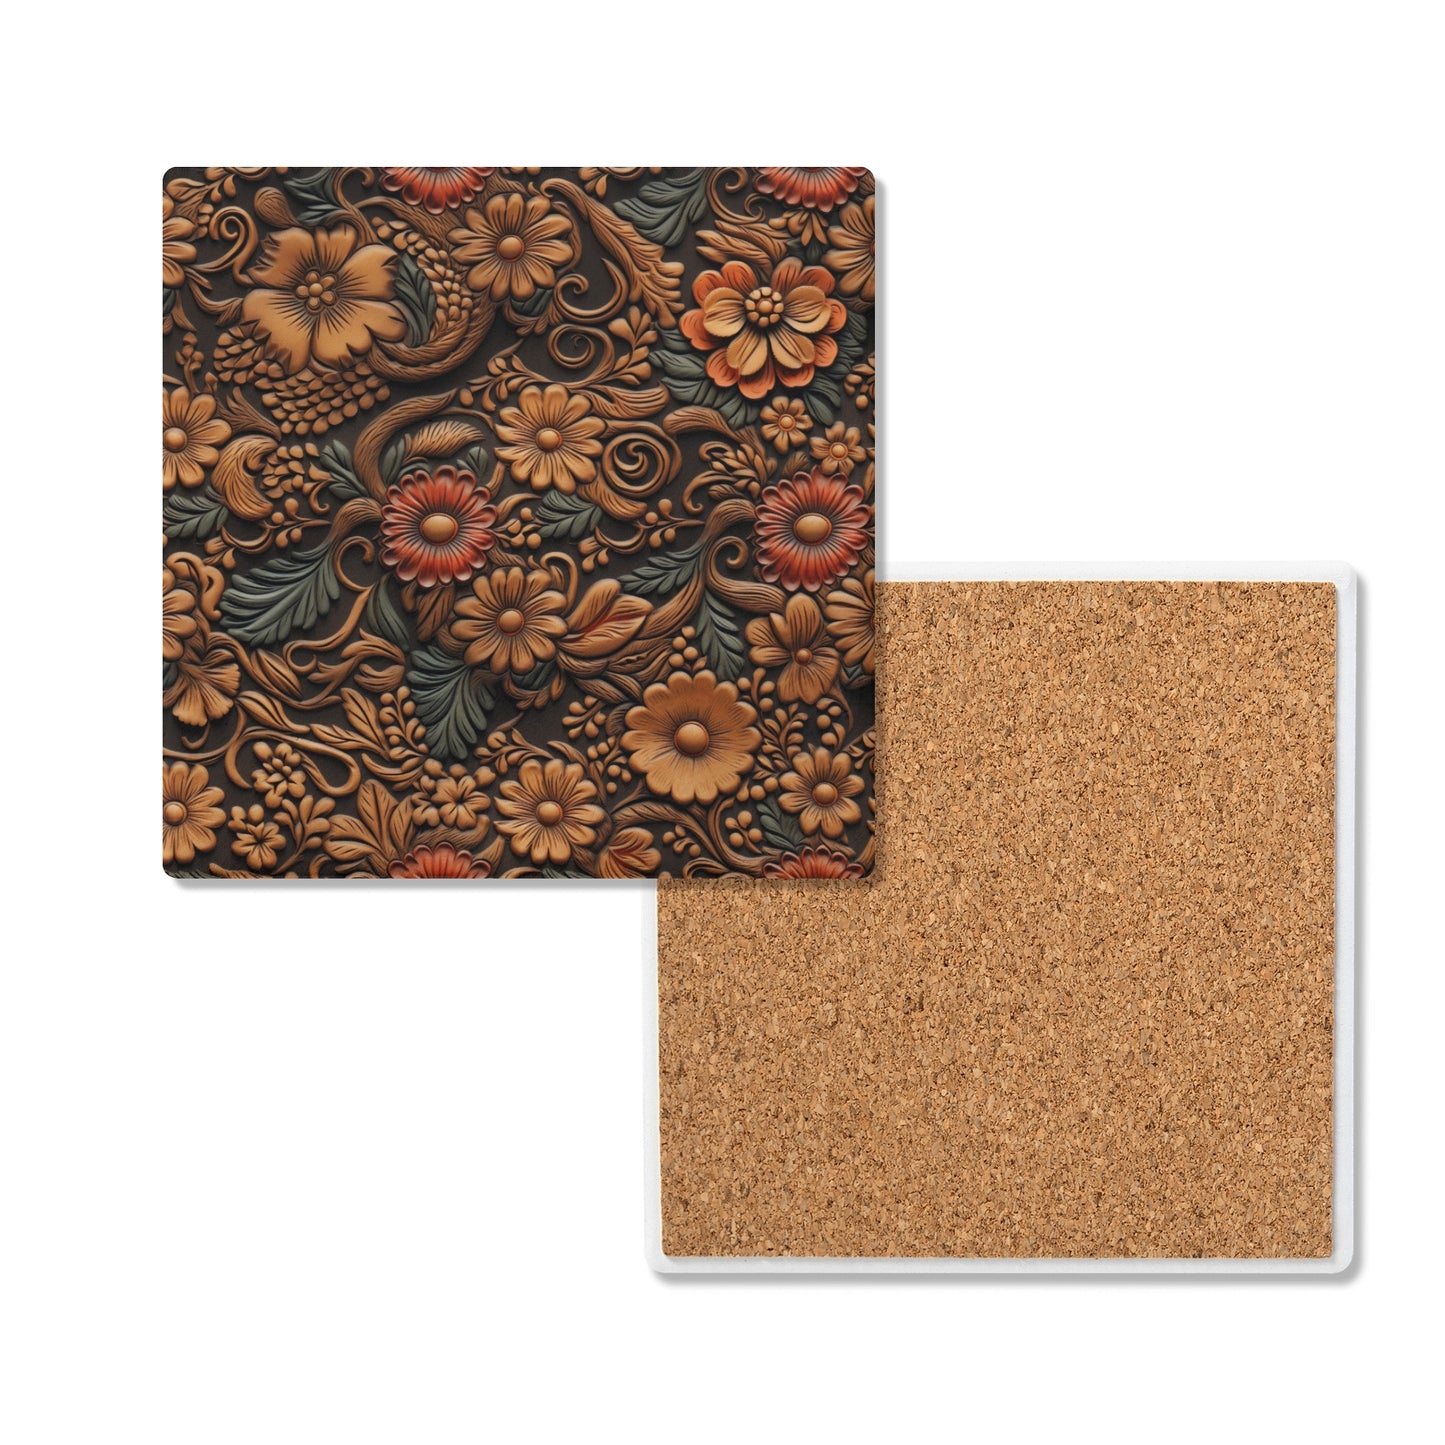 Tooled Leather Flowers with Red and Blue Accent Print Square Ceramic Coasters - Set of 4